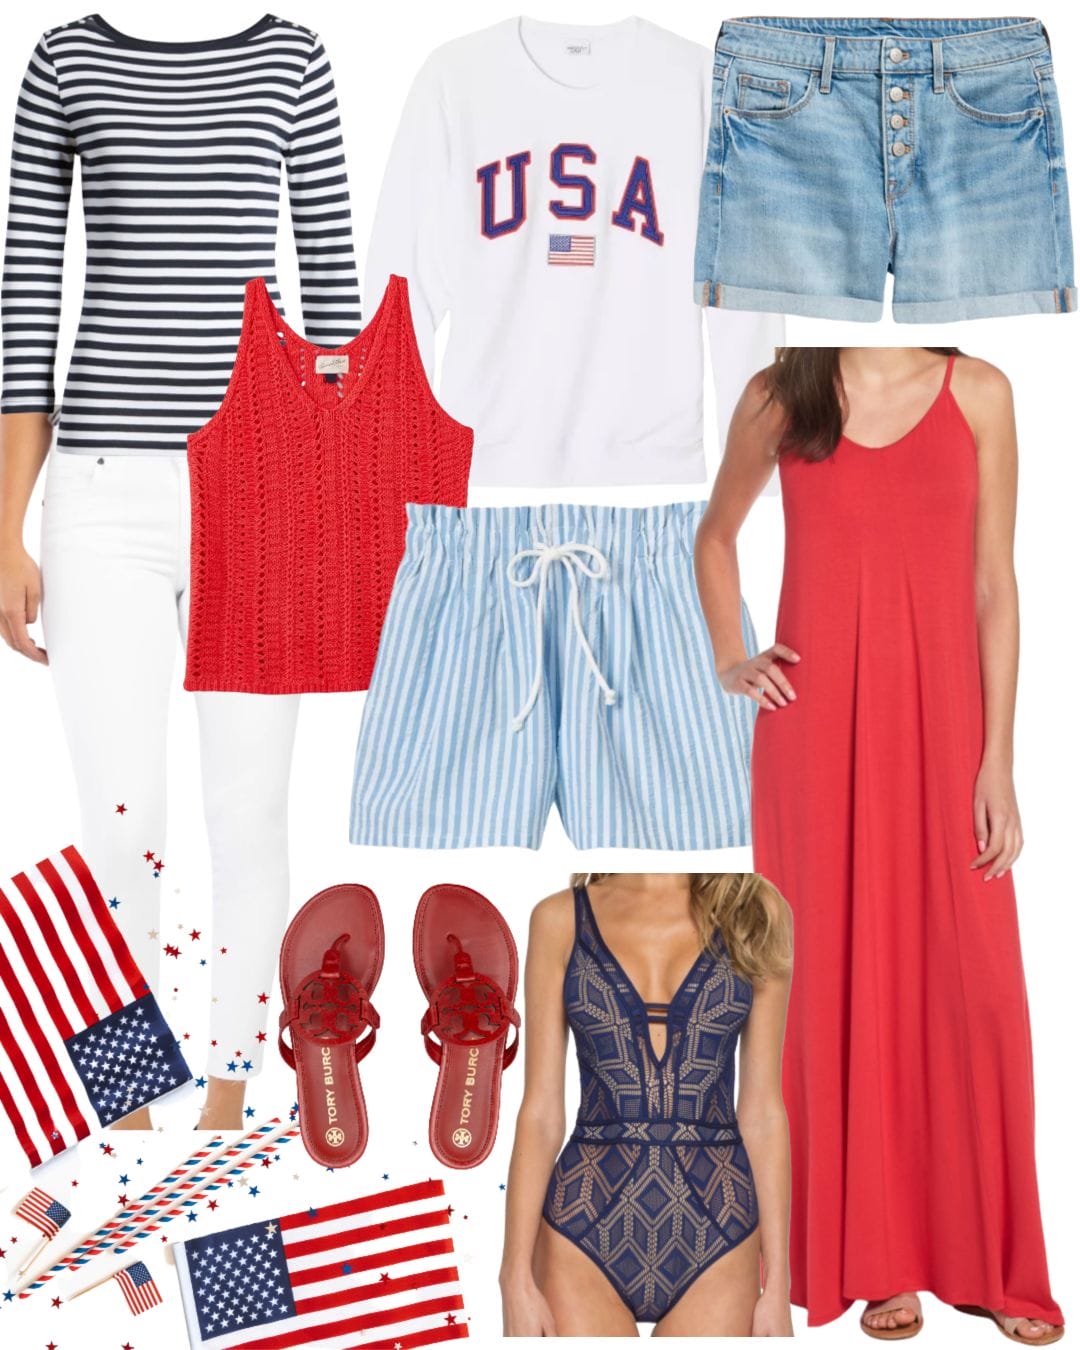 Dressing Room Finds Nordstrom and Target, Fourth of July Finds, Striped Top, USA Top, Shorts, Striped Shorts, Maxi Dress, Sweater Tank, Miller Sandals, Becca Swimsuit 